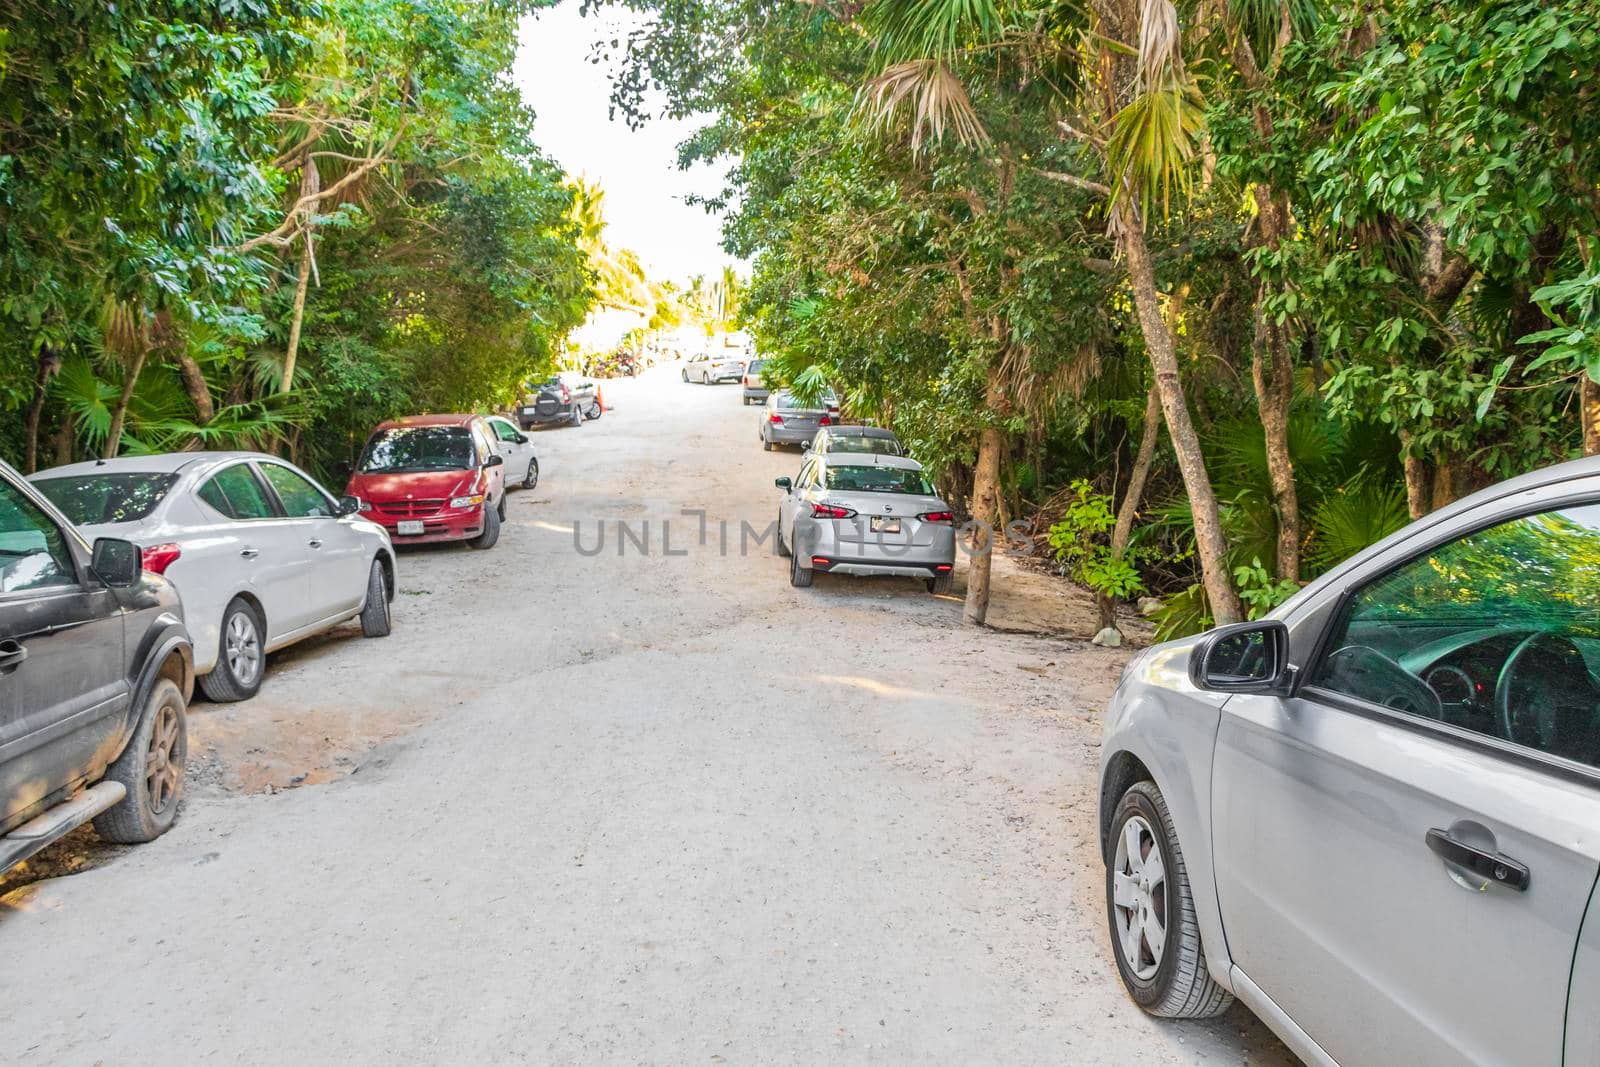 Tulum Mexico 02. February 2022 Sandy way path entrance to the amazing and beautiful caribbean coast and beach with panorama view turquoise water people and parked cars of Tulum in Quintana Roo Mexico.